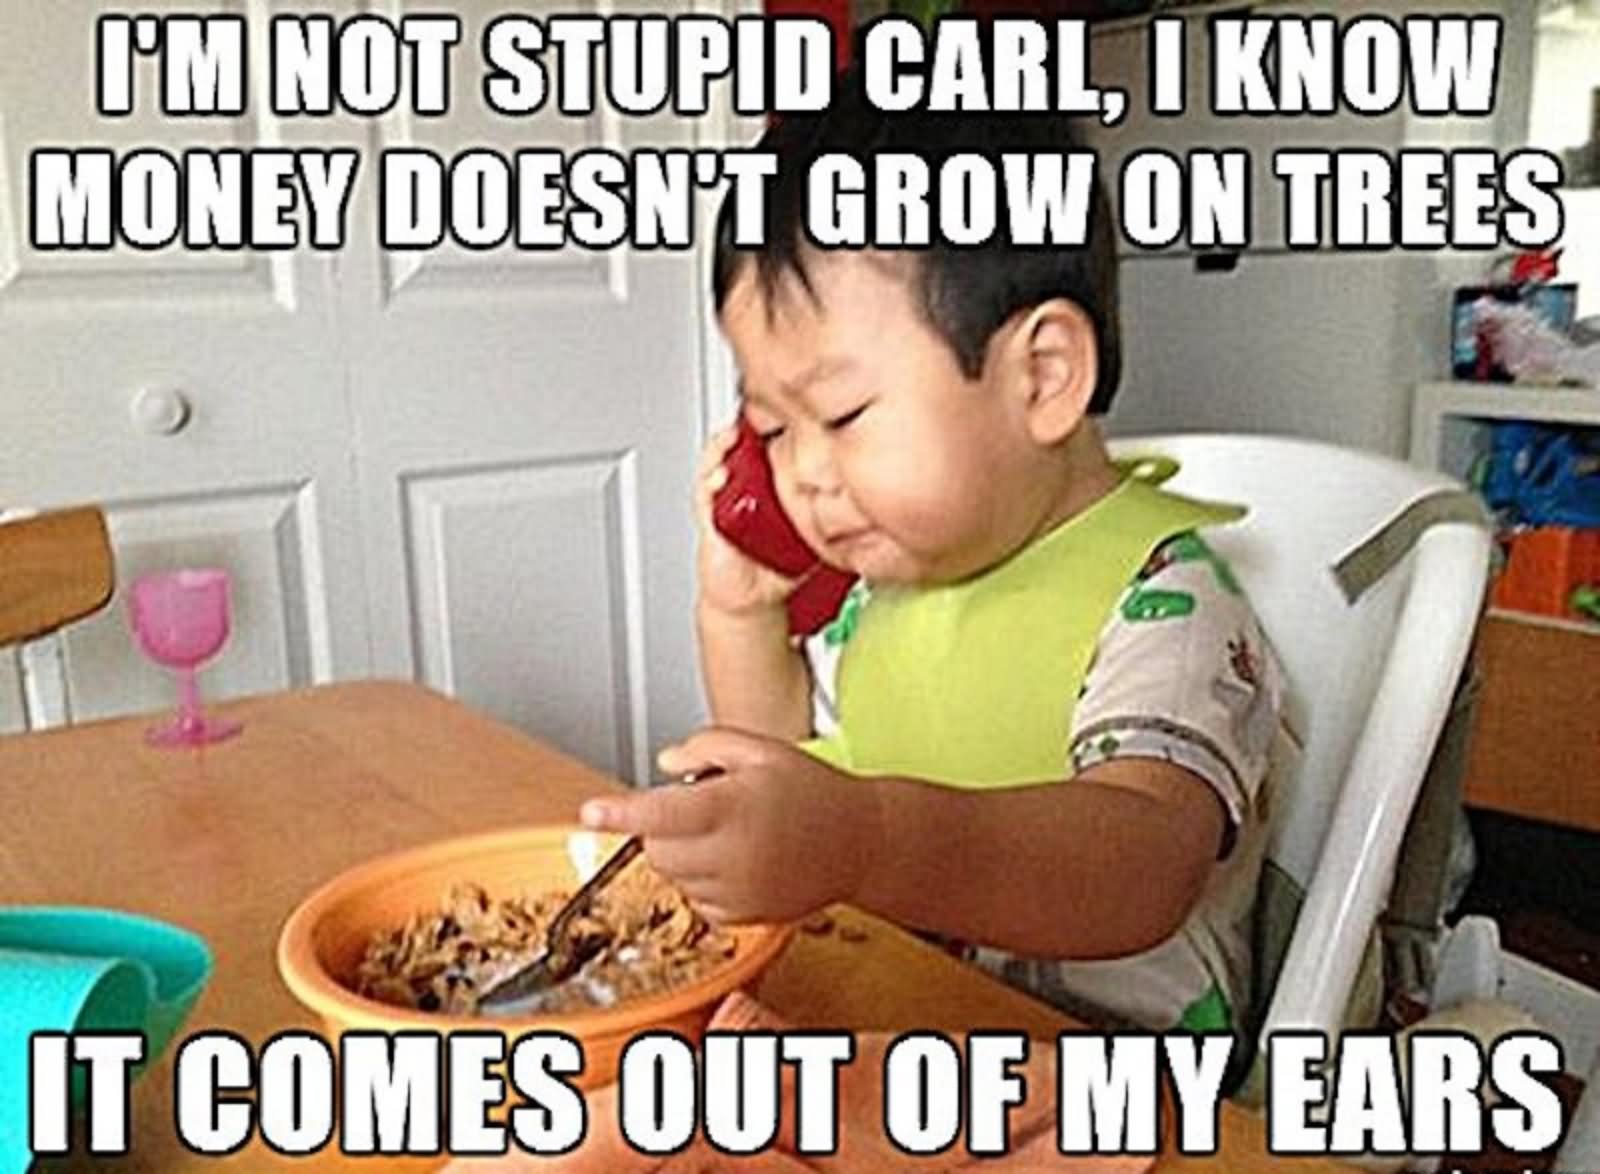 I Am Not Stupid Carl I Know Money Doesn't Grow On Trees Funny Baby Face Meme Image